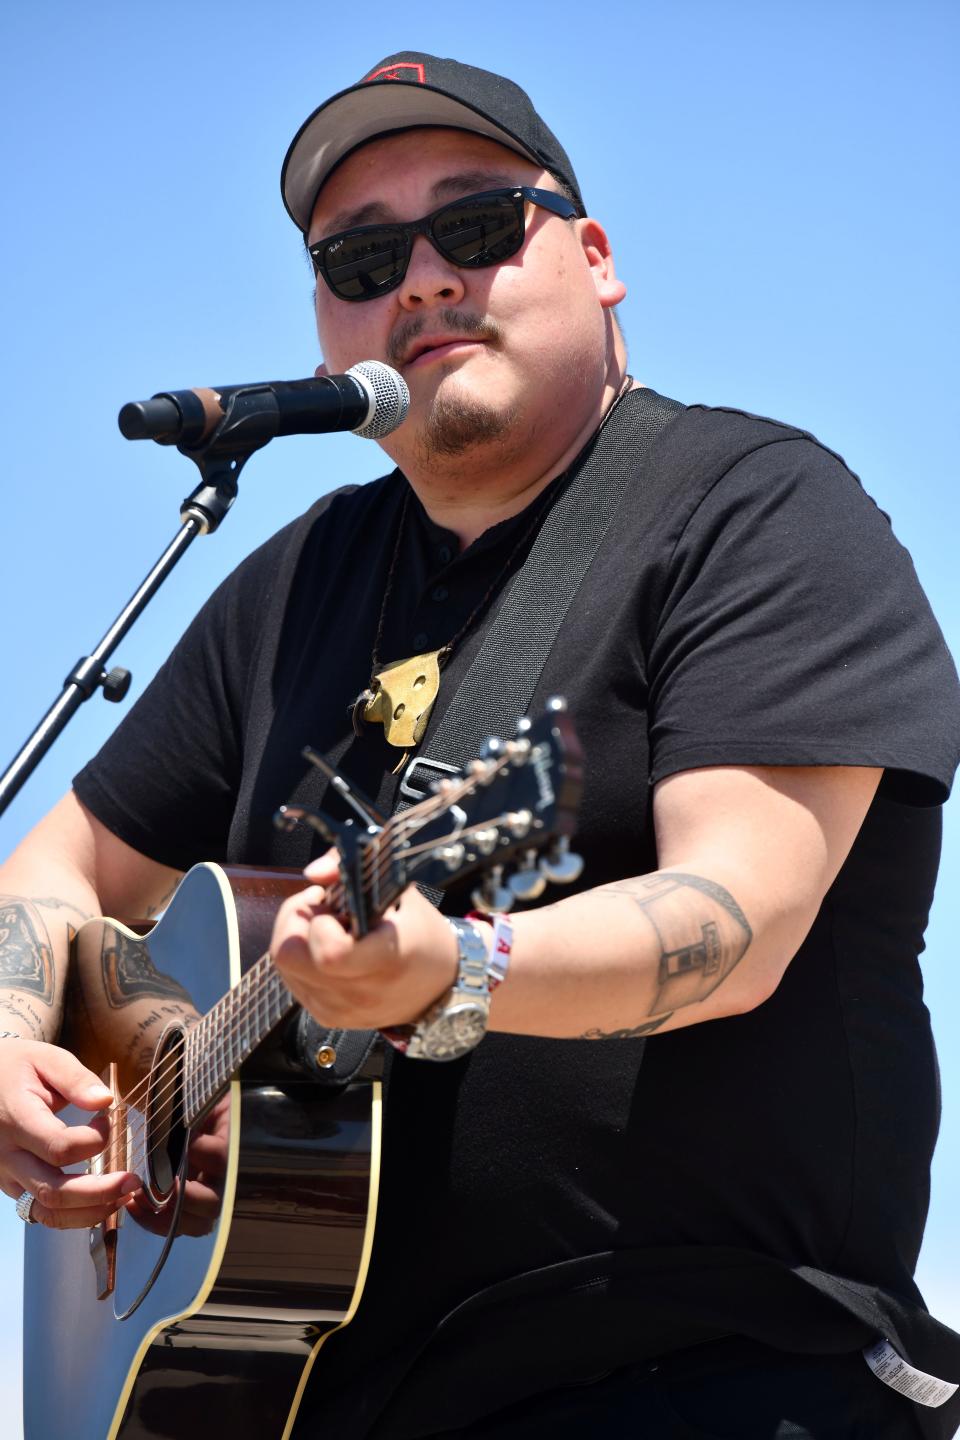 Singer William Prince performs onstage during Day 2 of the Stagecoach Music Festival on April 27, 2019 in Indio, California.